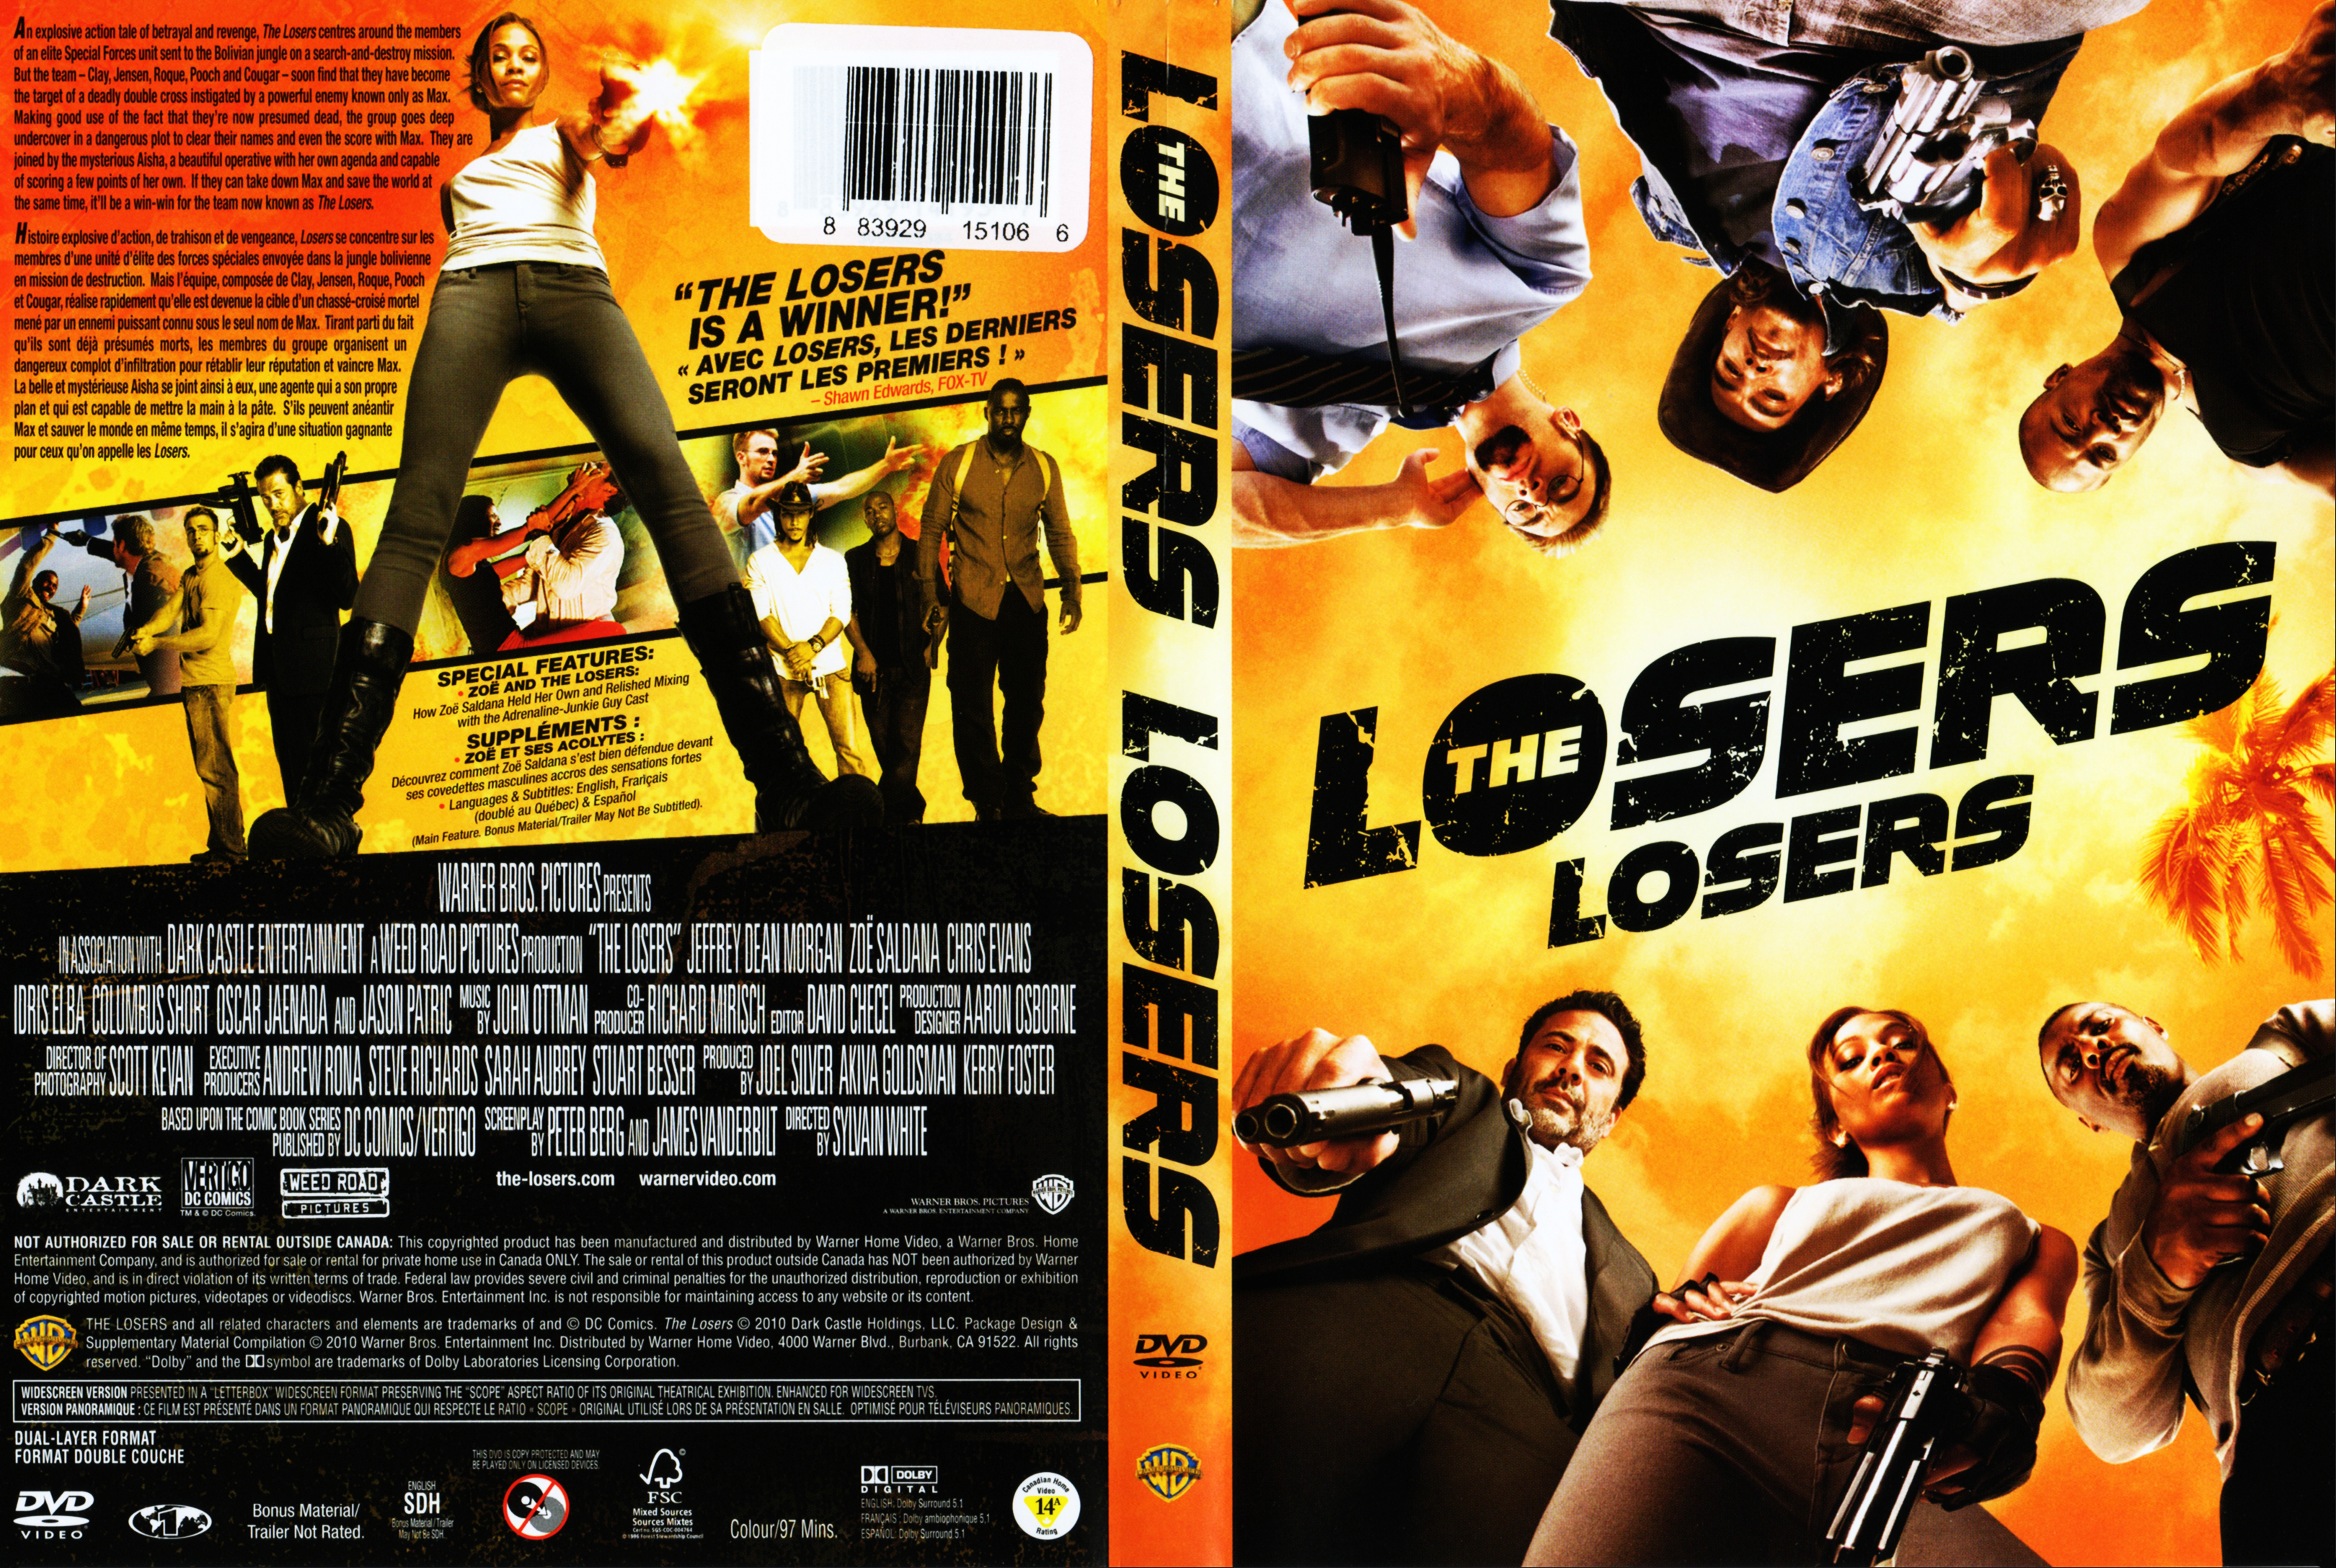 Jaquette DVD The Losers (Canadienne)